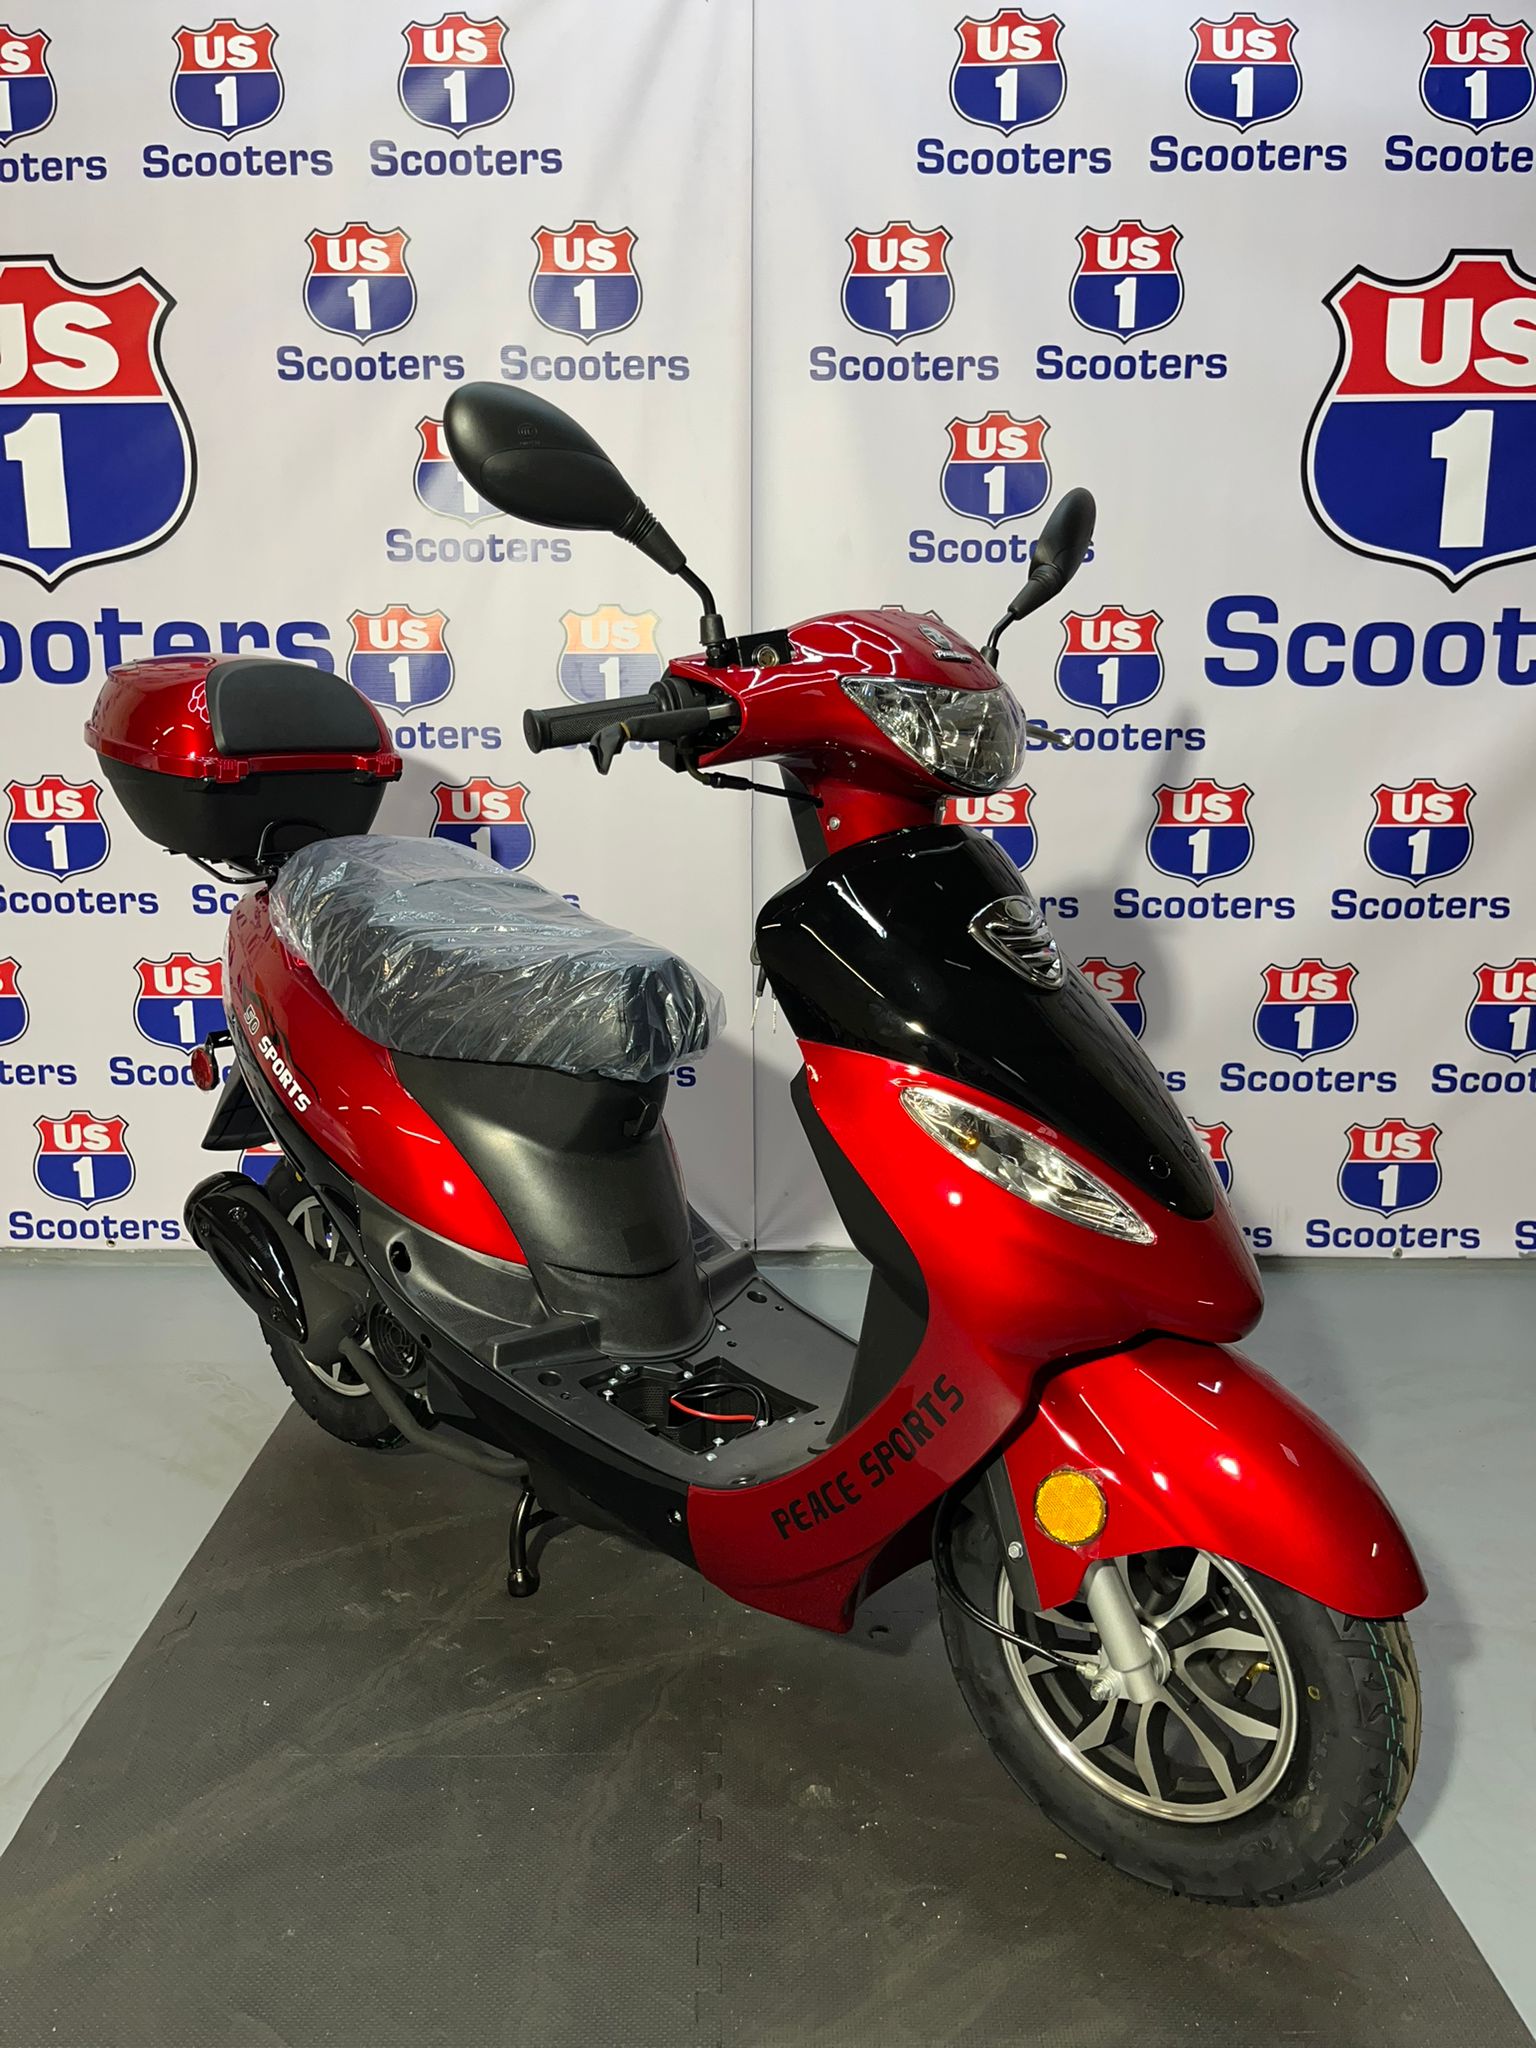 US1 Scooters - 50cc & 150cc Scooters from $545 - Miami, FL